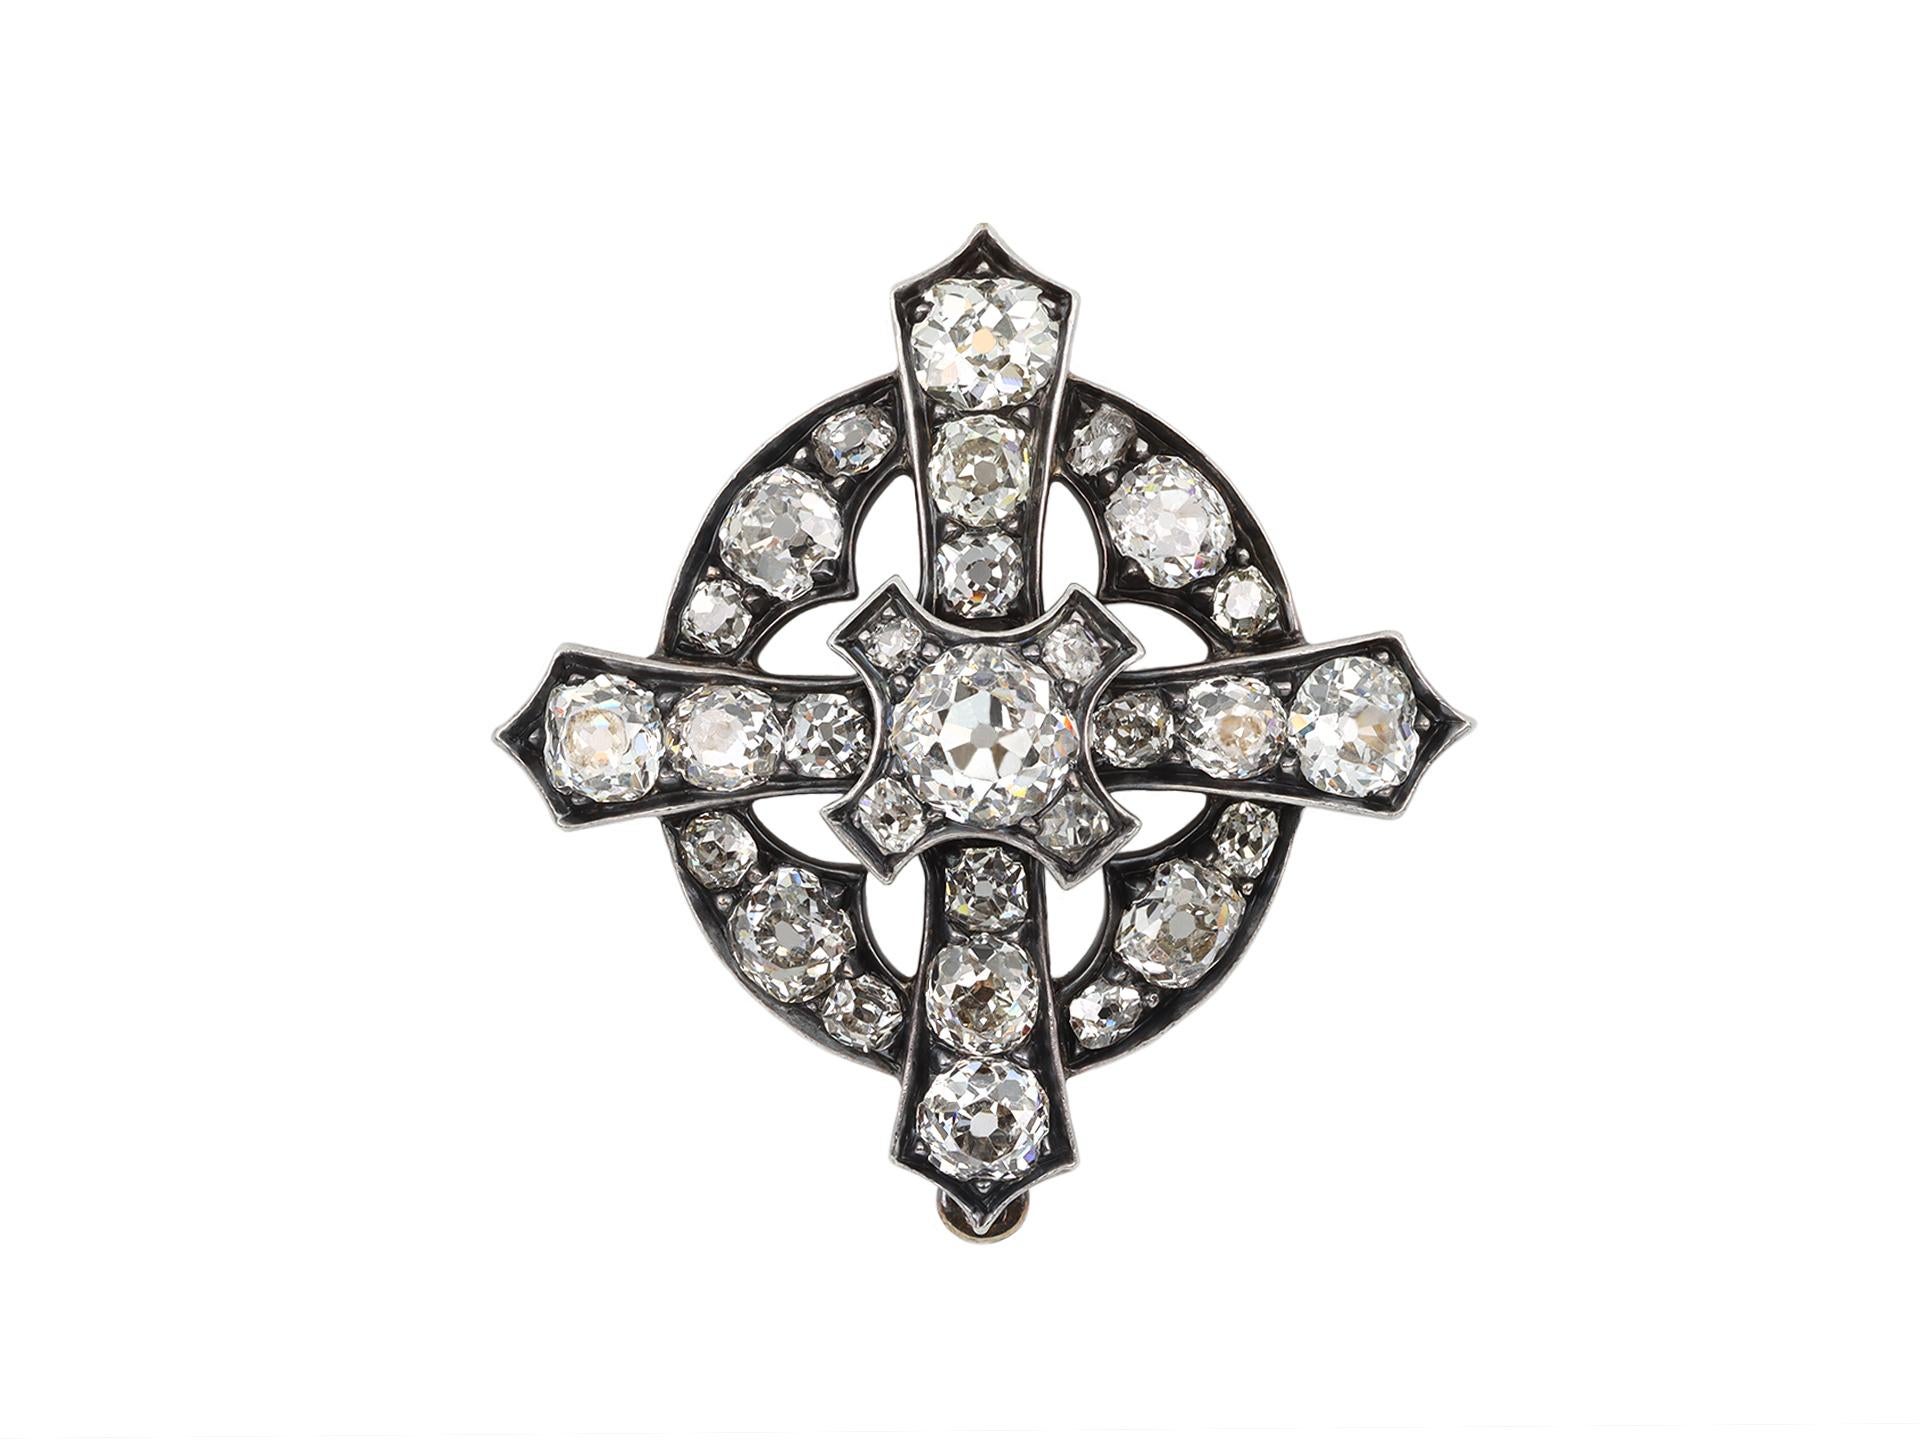 Diamond cross pendant / brooch. Set to centre with a cushion shape old mine diamond in an open back grain setting with an approximate weight if 0.65 carats, further set with twenty-eight cushion shape old mine diamonds in open back grain settings,